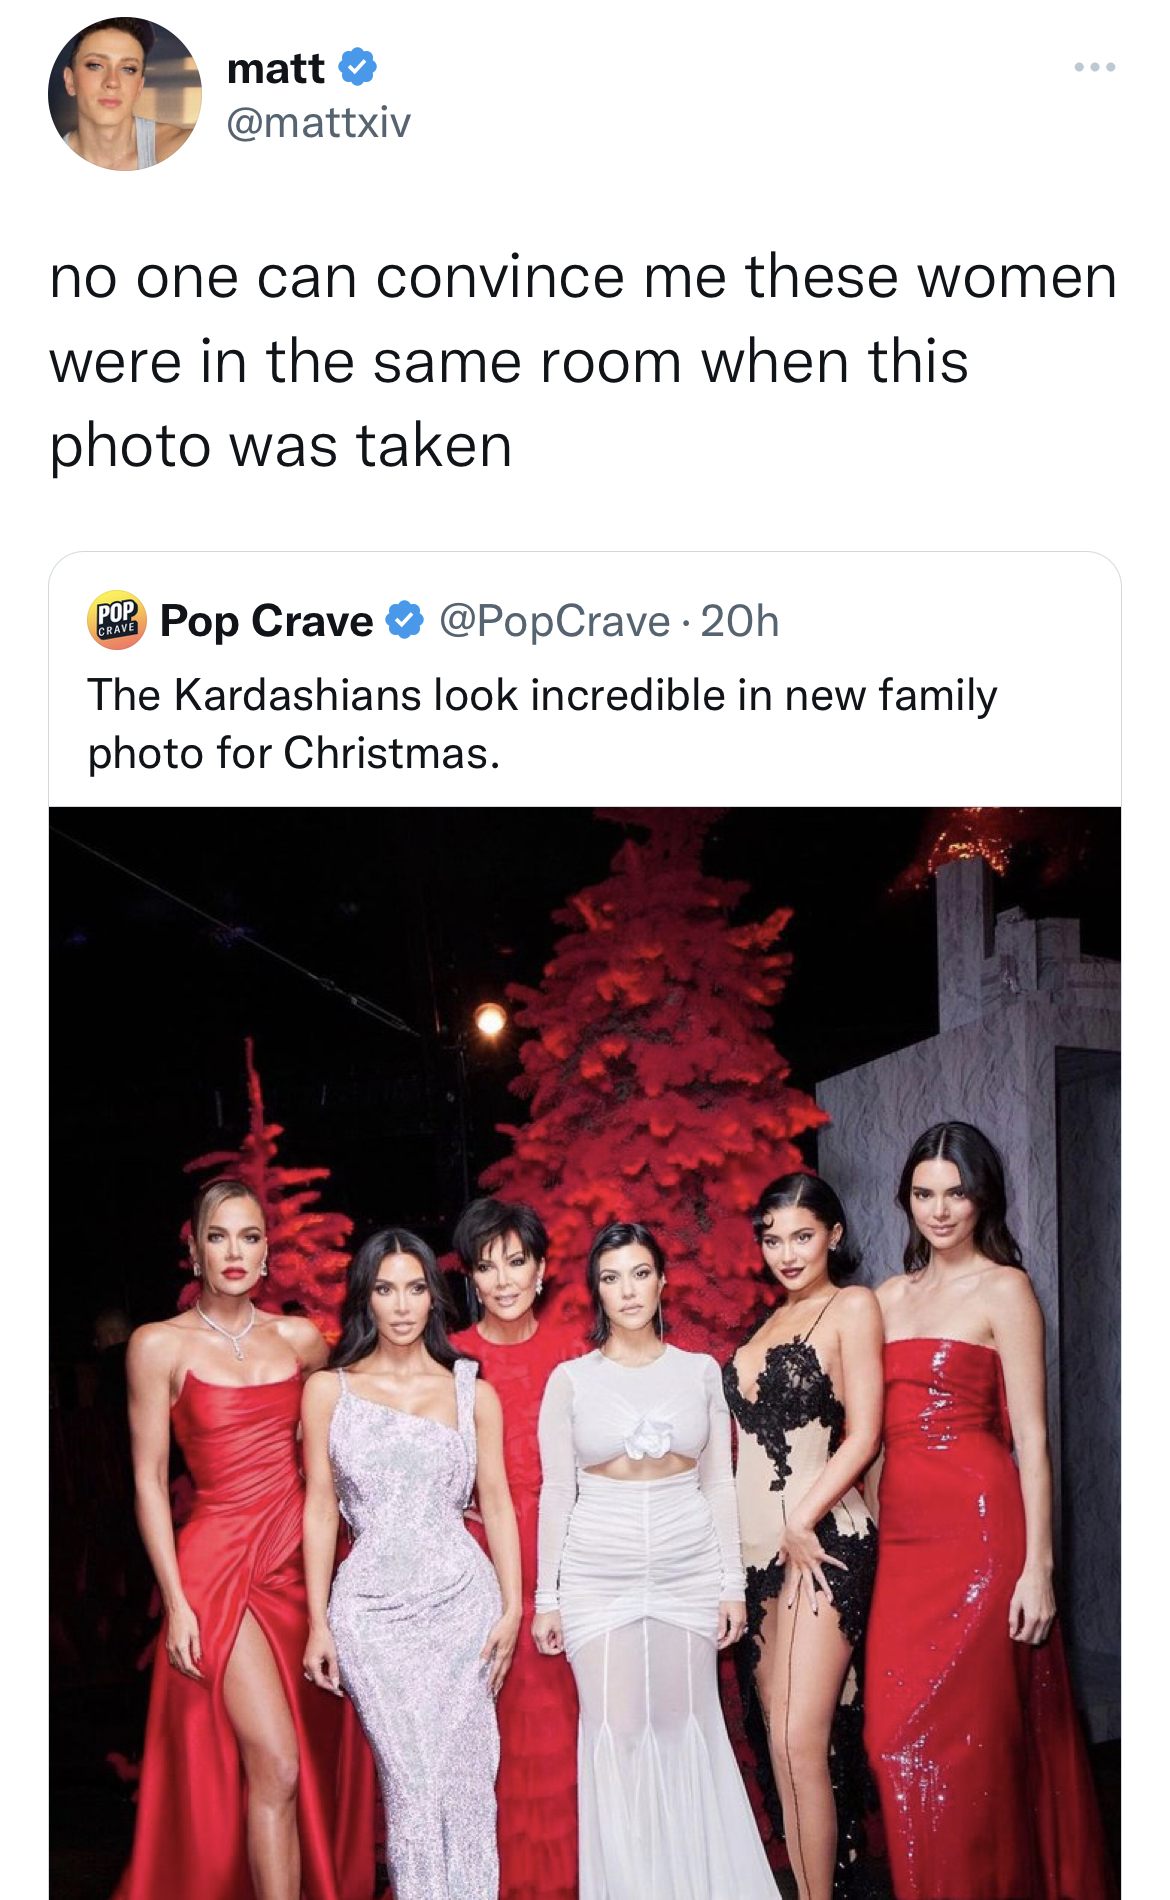 Kim Kardashian - matt no one can convince me these women were in the same room when this photo was taken Pop Crave The Kardashians look incredible in new family photo for Christmas.